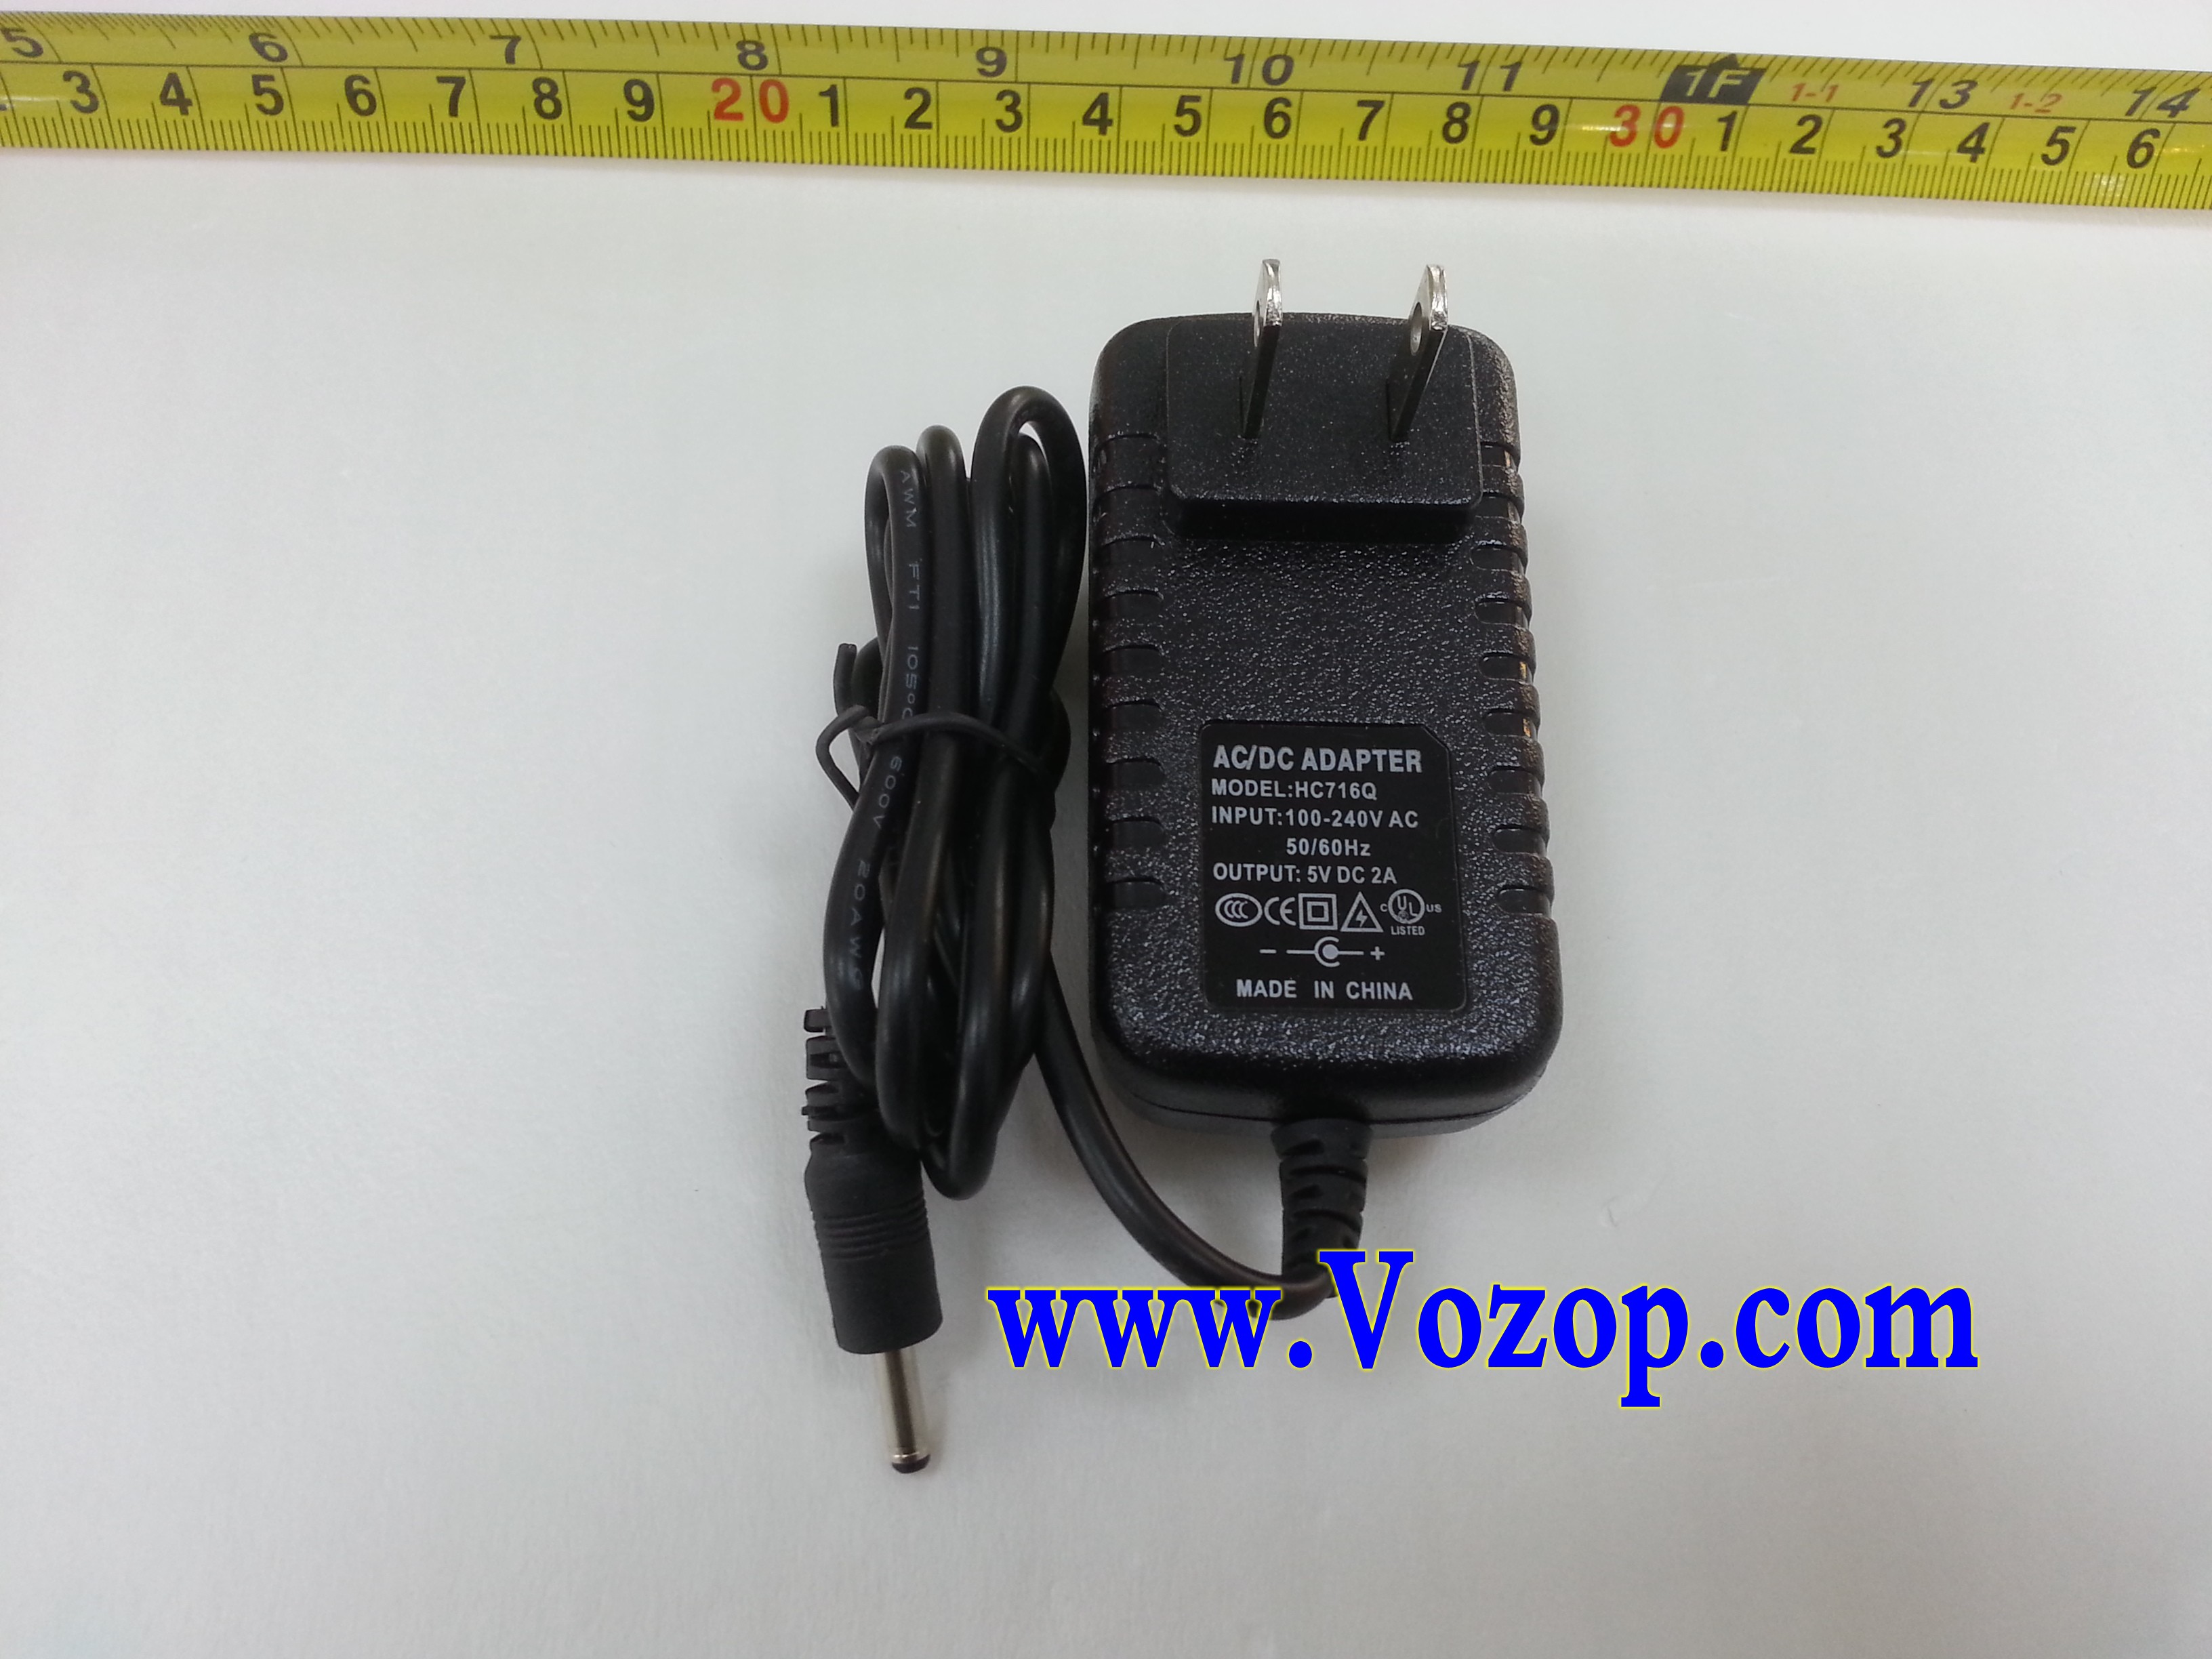 DC_5V_2A_Power_Adapter_AC_to_DC_Power_Supply